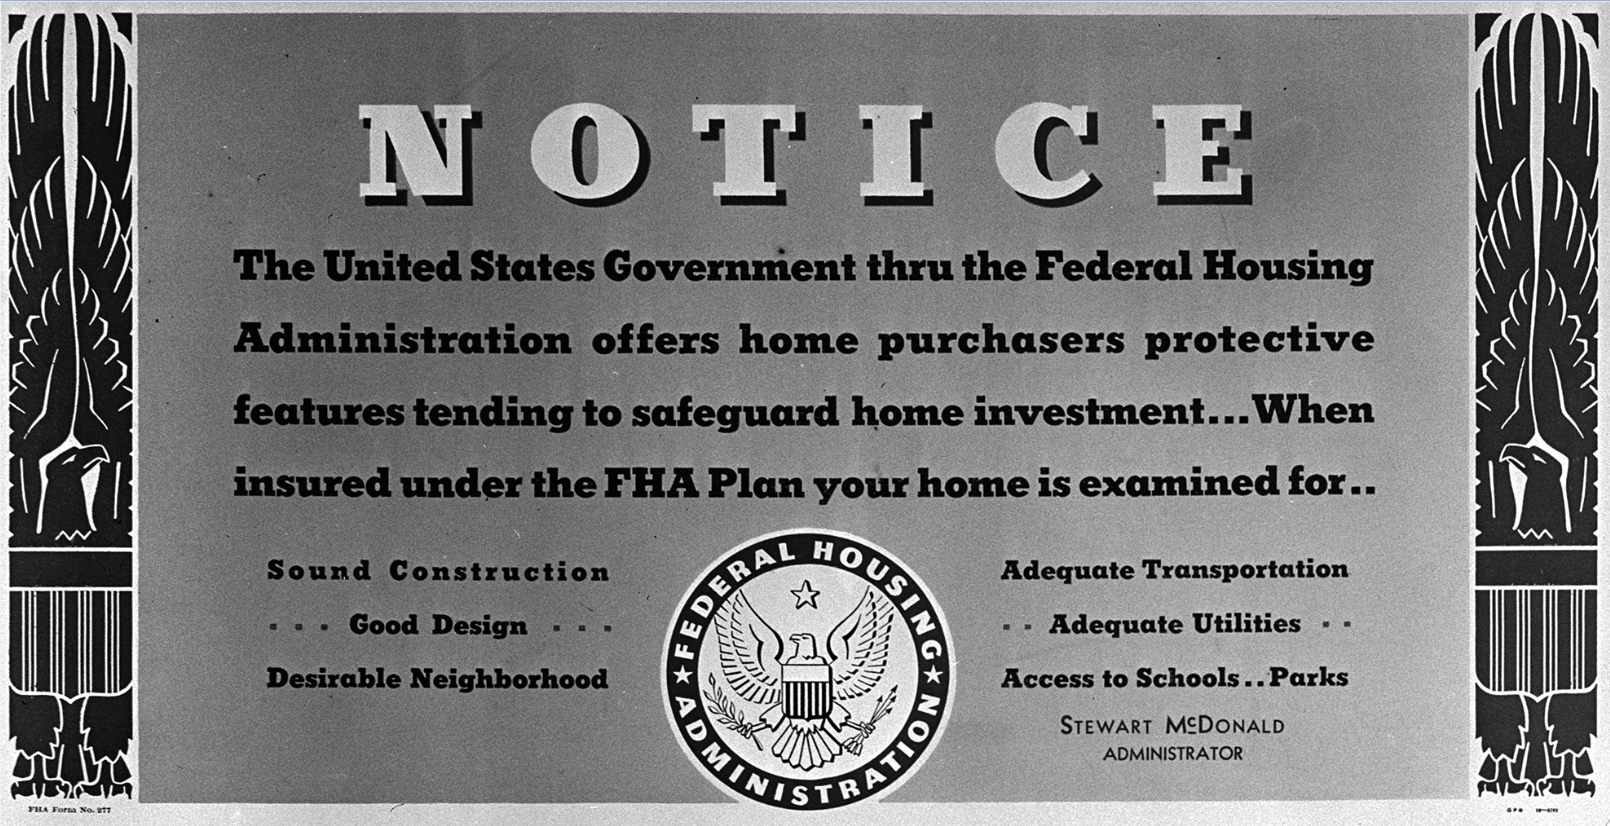 These informational signs were created by the FHA to promote the accessible terms of the FHA program. While they advertised that “your rent money will buy a home,” the federal home mortgage program required segregation and promoted discriminatory lending practices. Library of Congress.